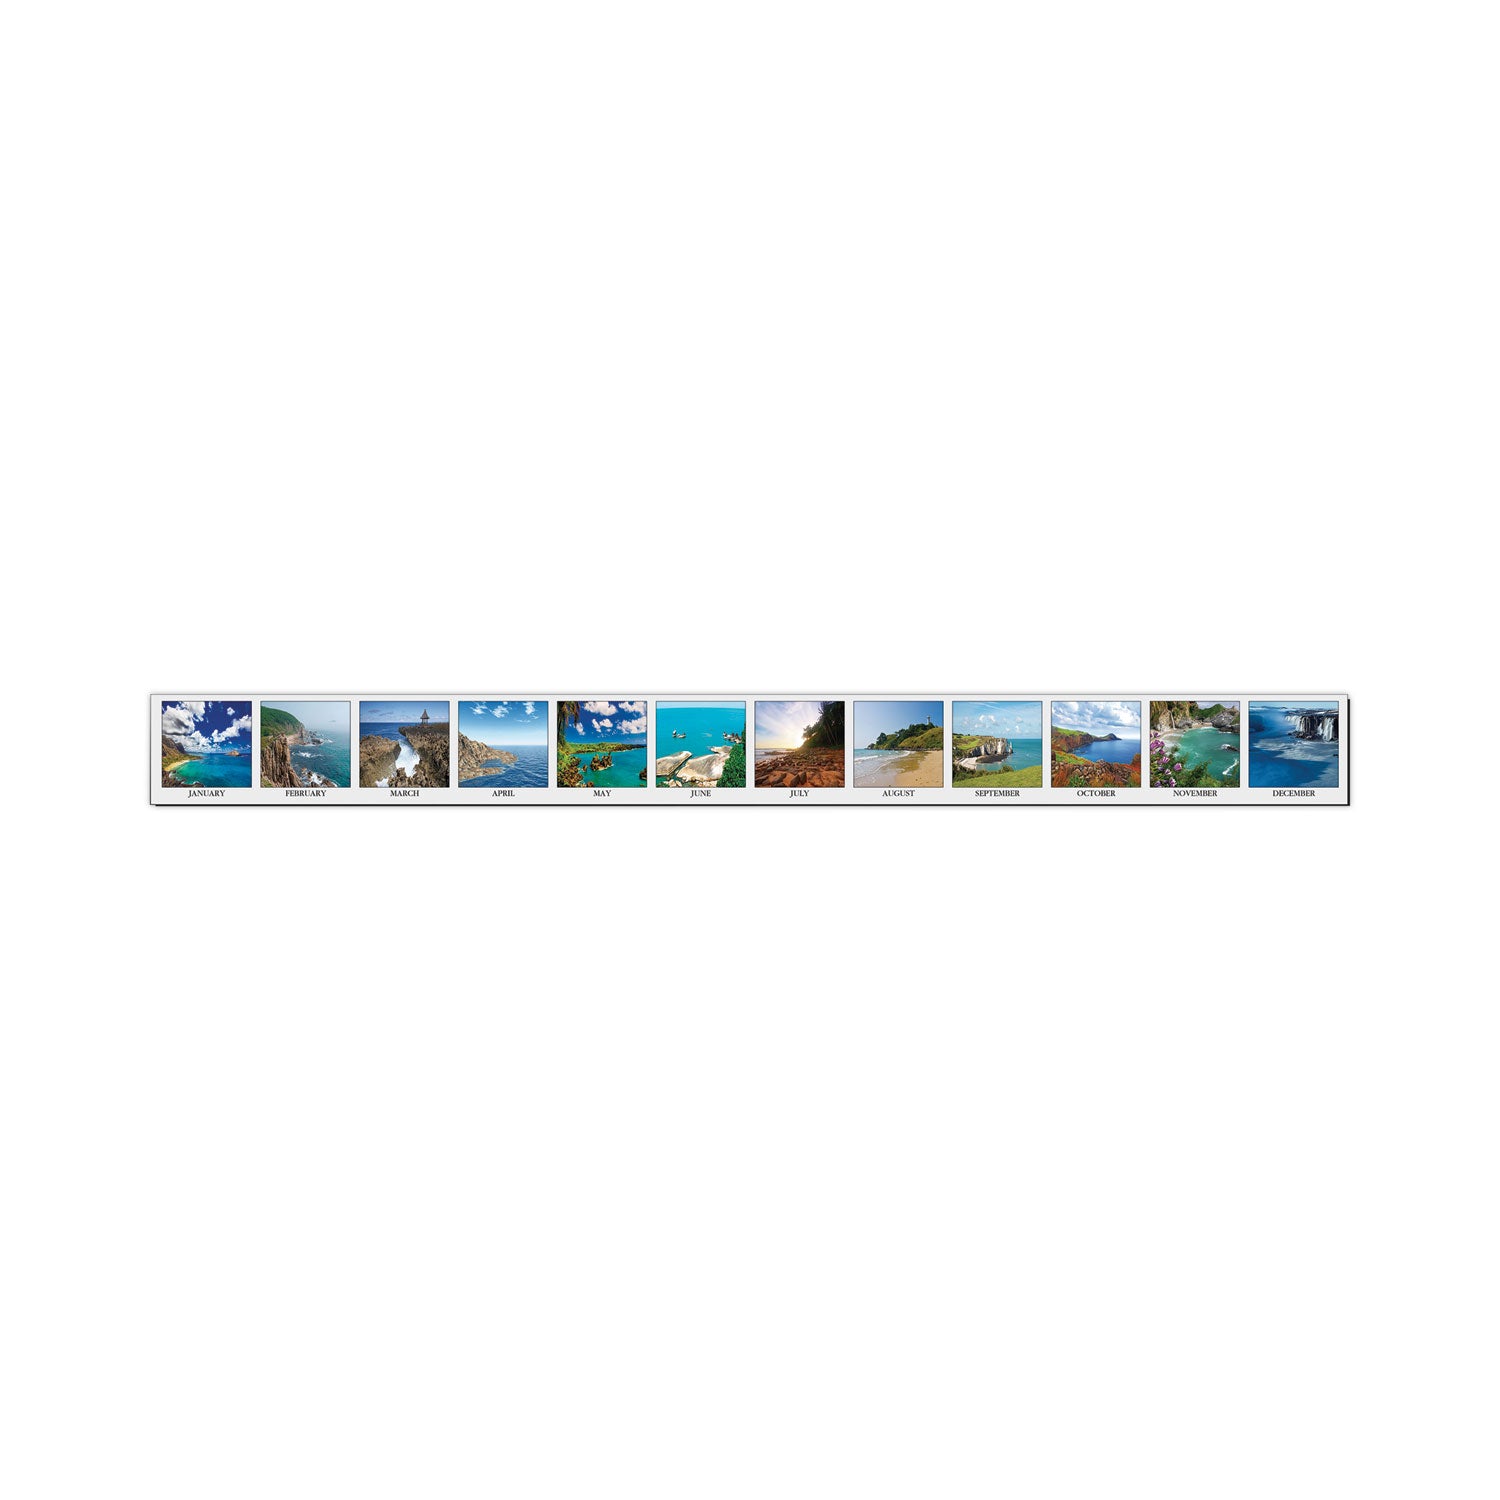 recycled-earthscapes-desk-pad-calendar-seascapes-photography-185-x-13-black-binding-corners12-month-jan-to-dec-2024_hod1386 - 2